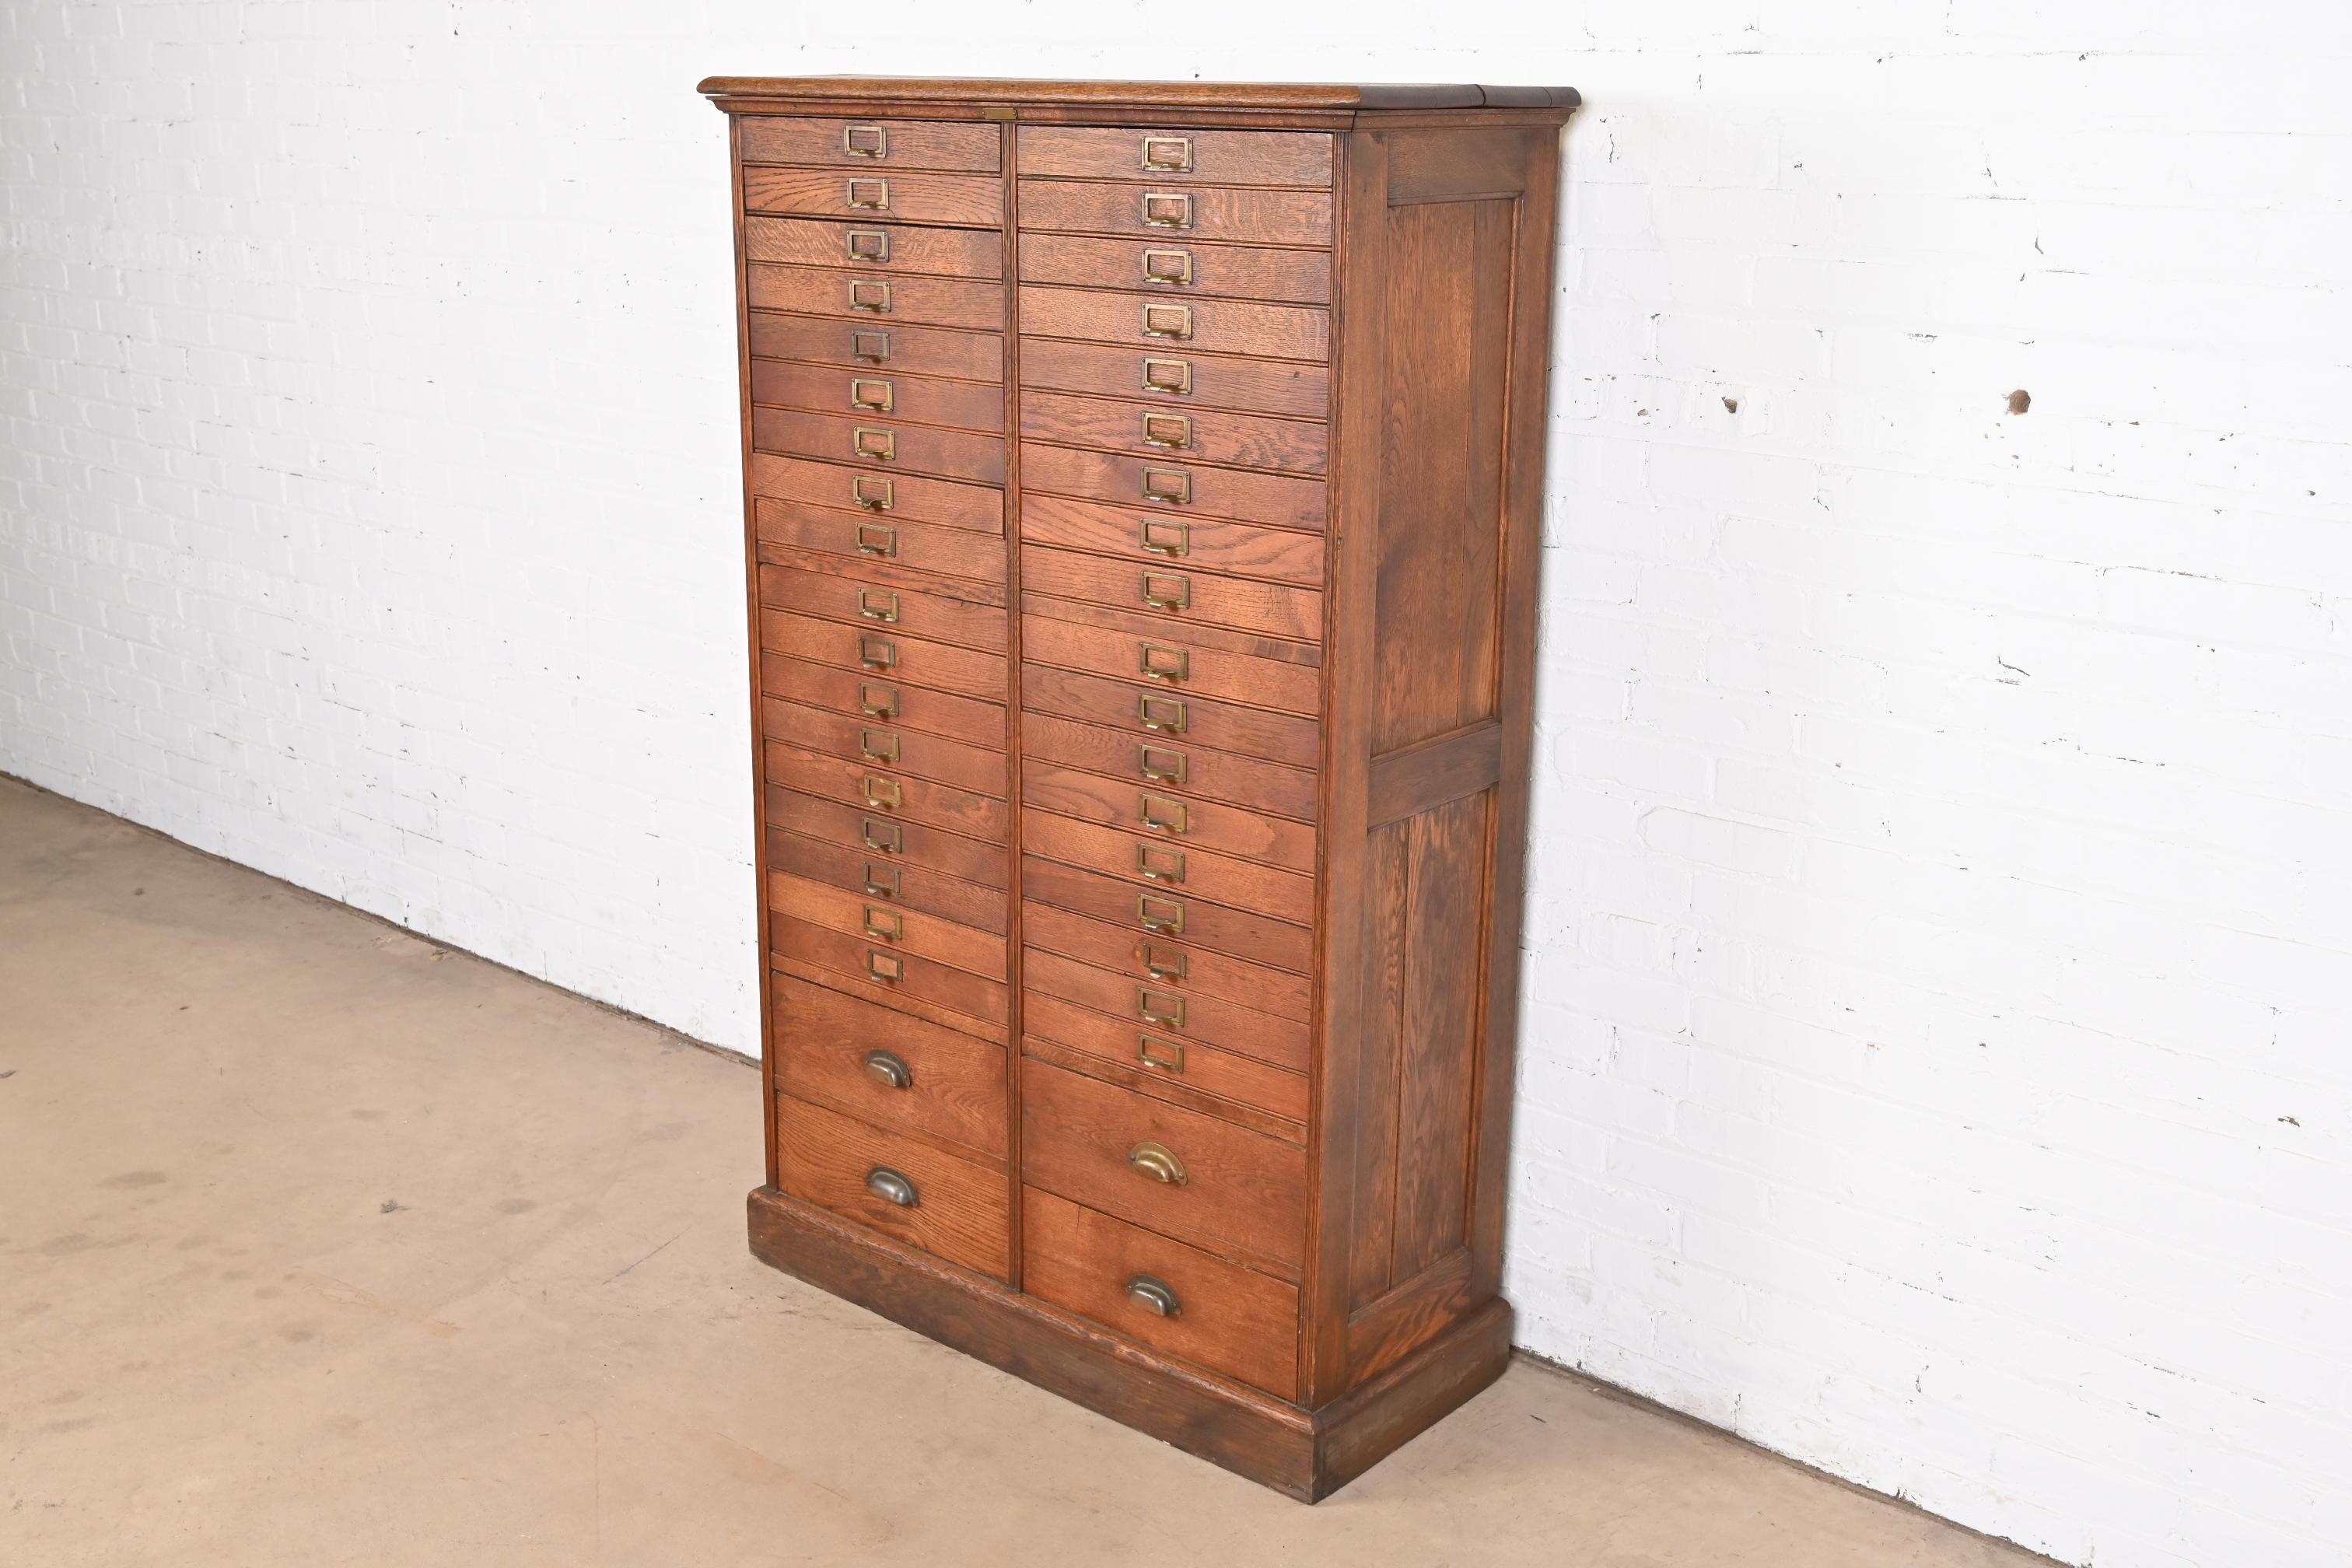 Antique Arts & Crafts Oak 40-Drawer File Cabinet or Chest of Drawers, Circa 1900 In Good Condition For Sale In South Bend, IN